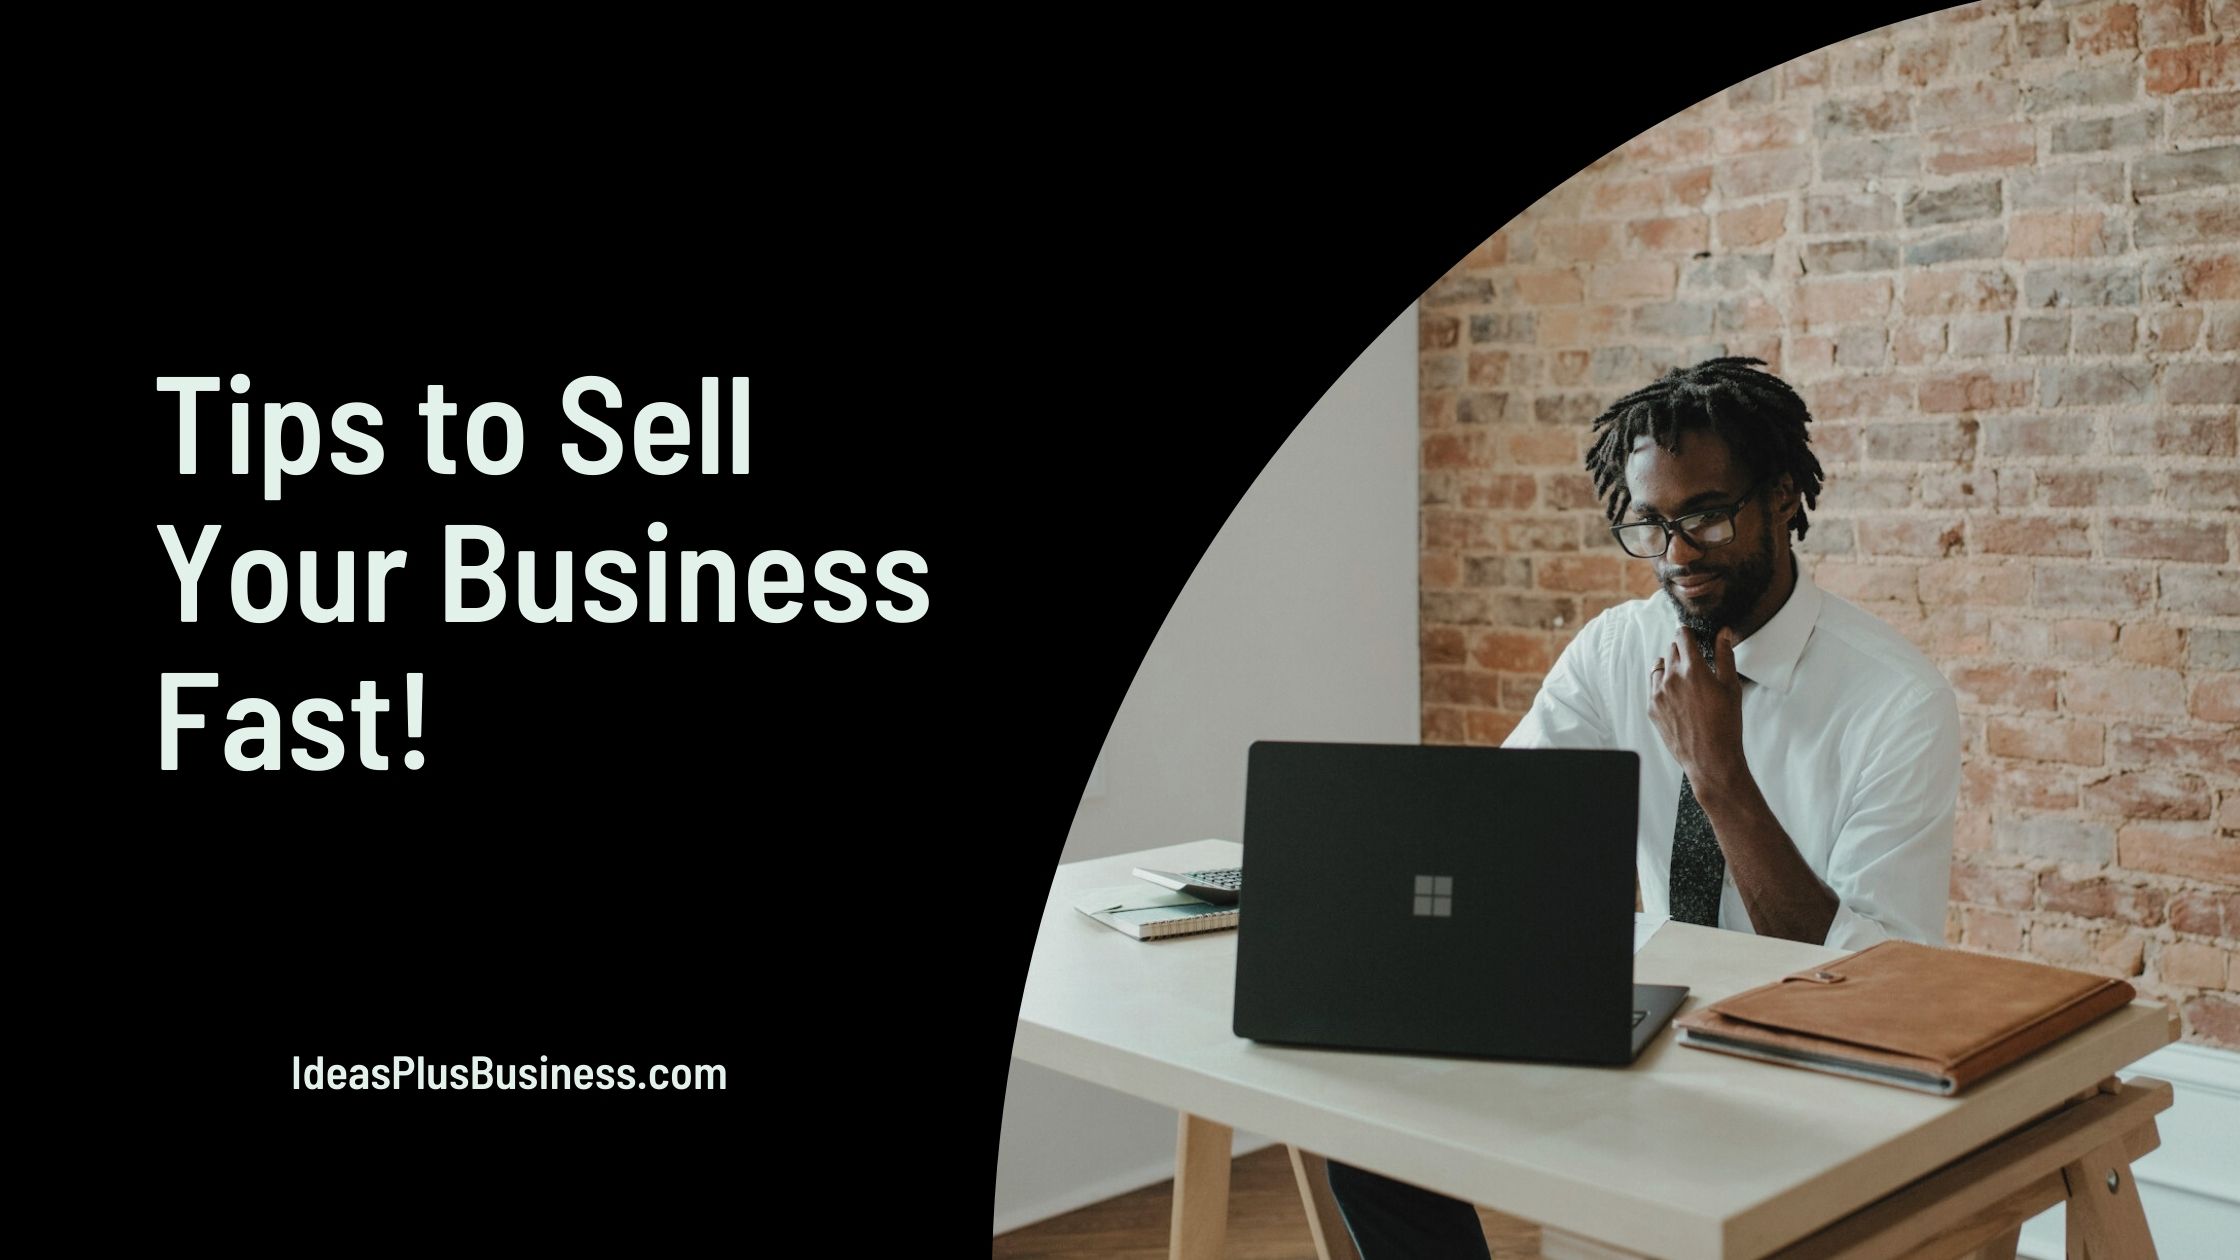 17 Great Tips to Sell Your Business Fast For Big Profits